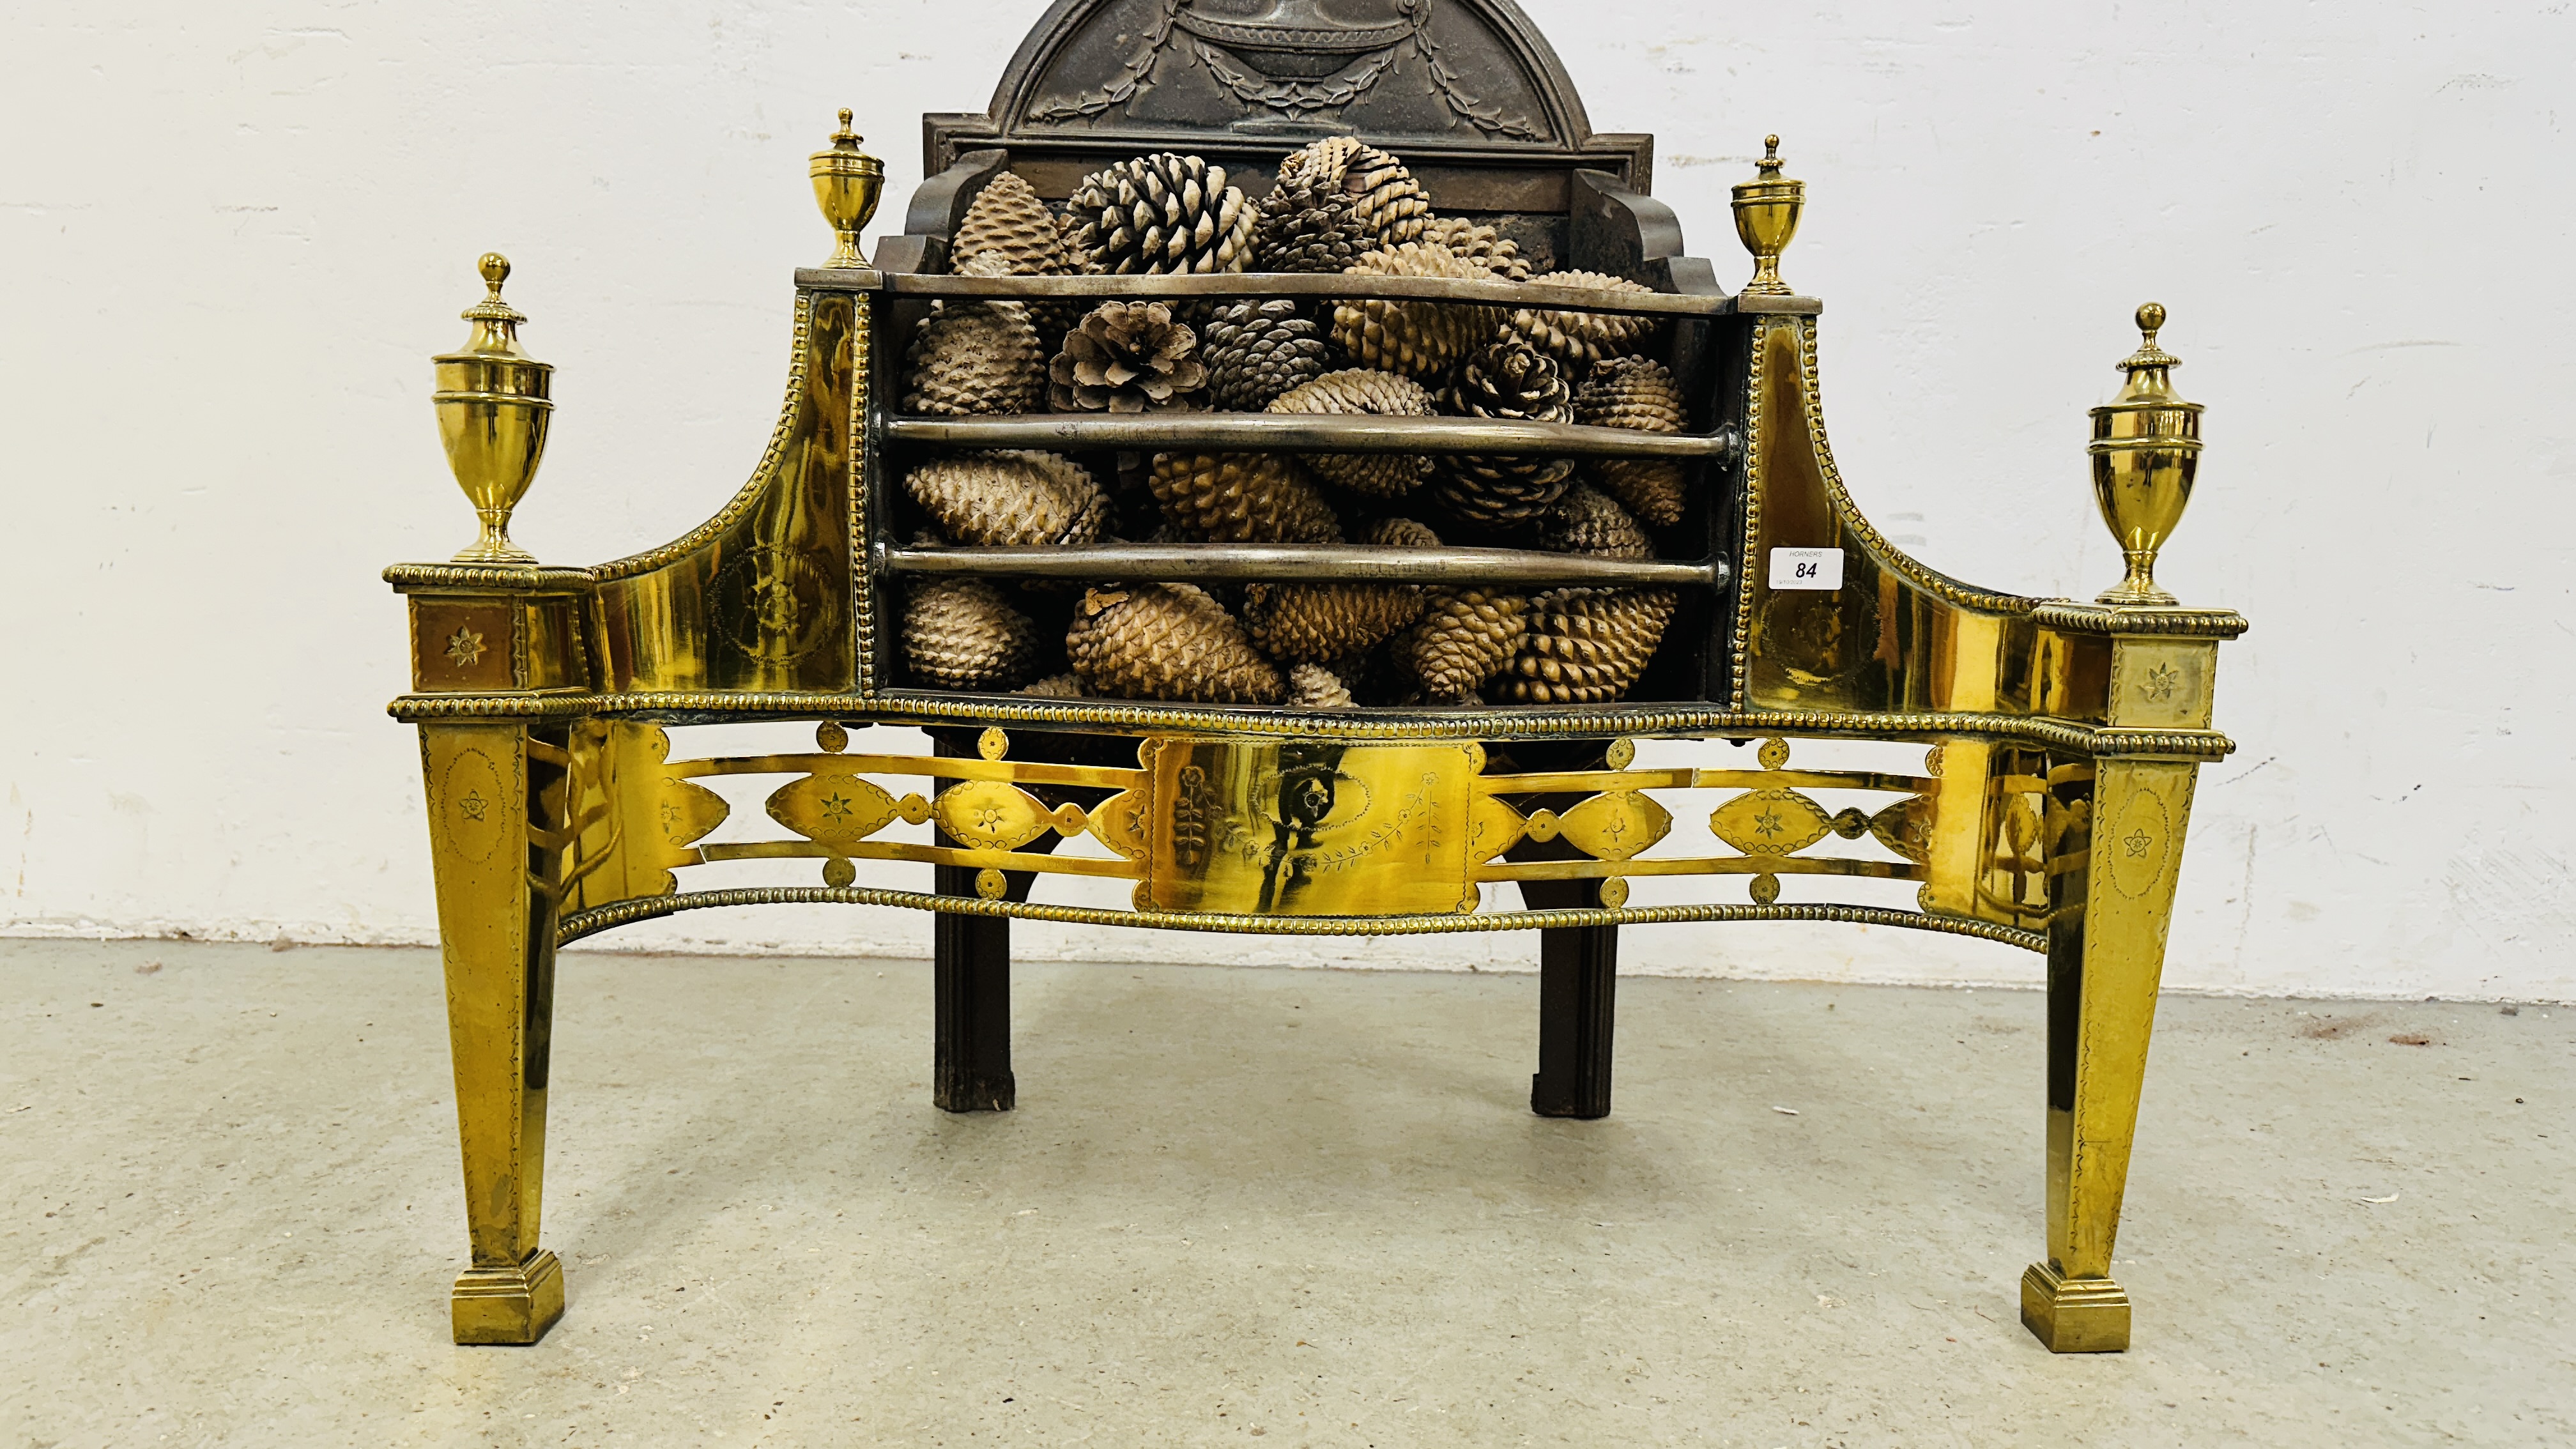 IMPRESSIVE HEAVY CAST FIRE BASKET WITH BRASS DETAILING - OVERALL WIDTH 83CM. - Image 2 of 11